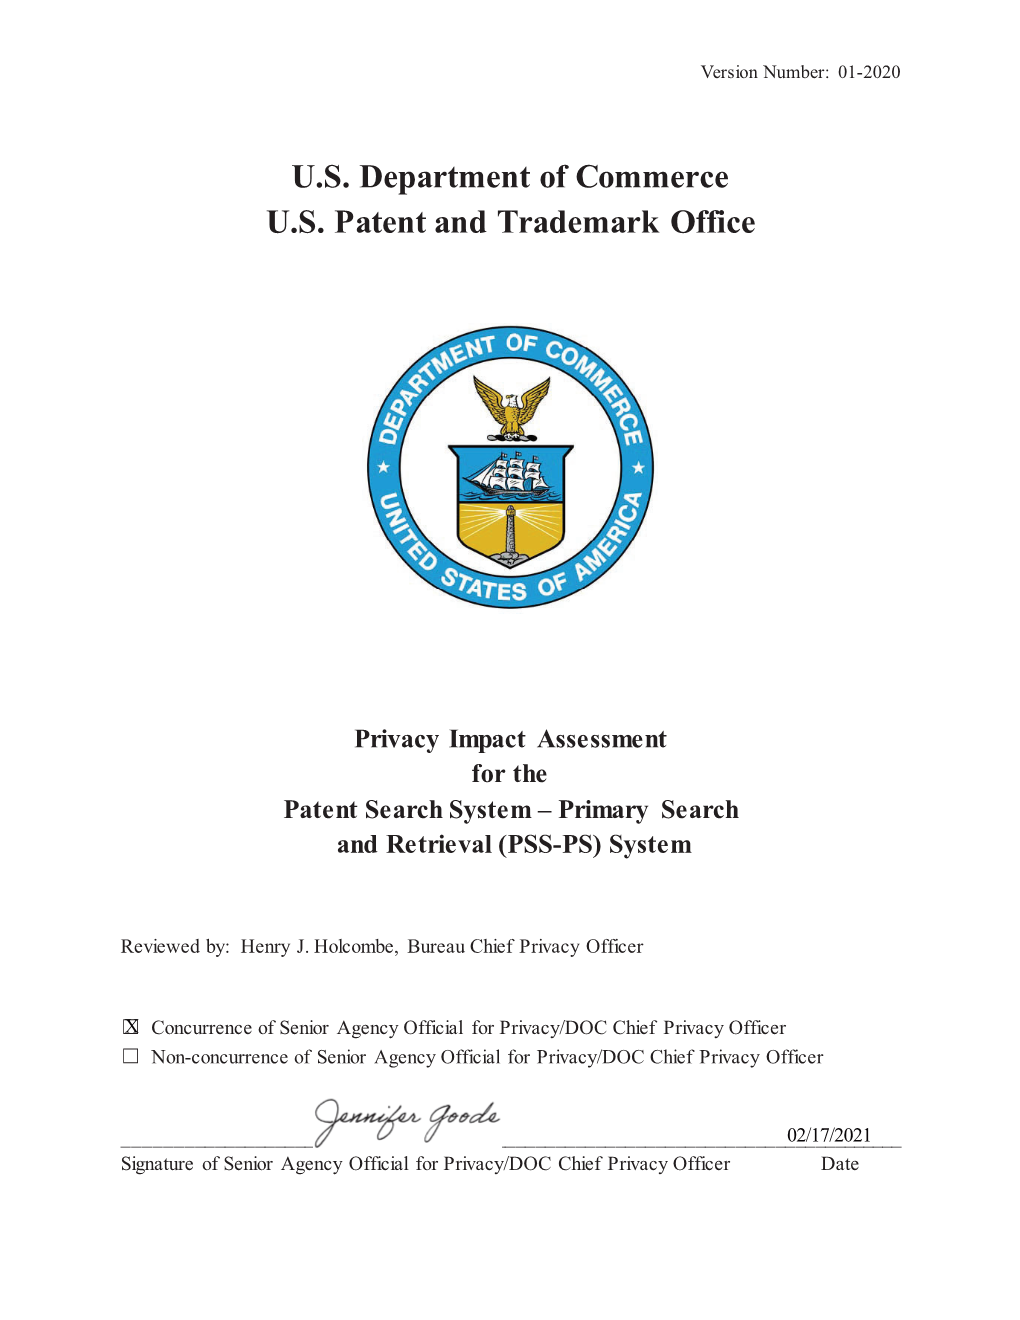 U.S. Department of Commerce U.S. Patent and Trademark Office